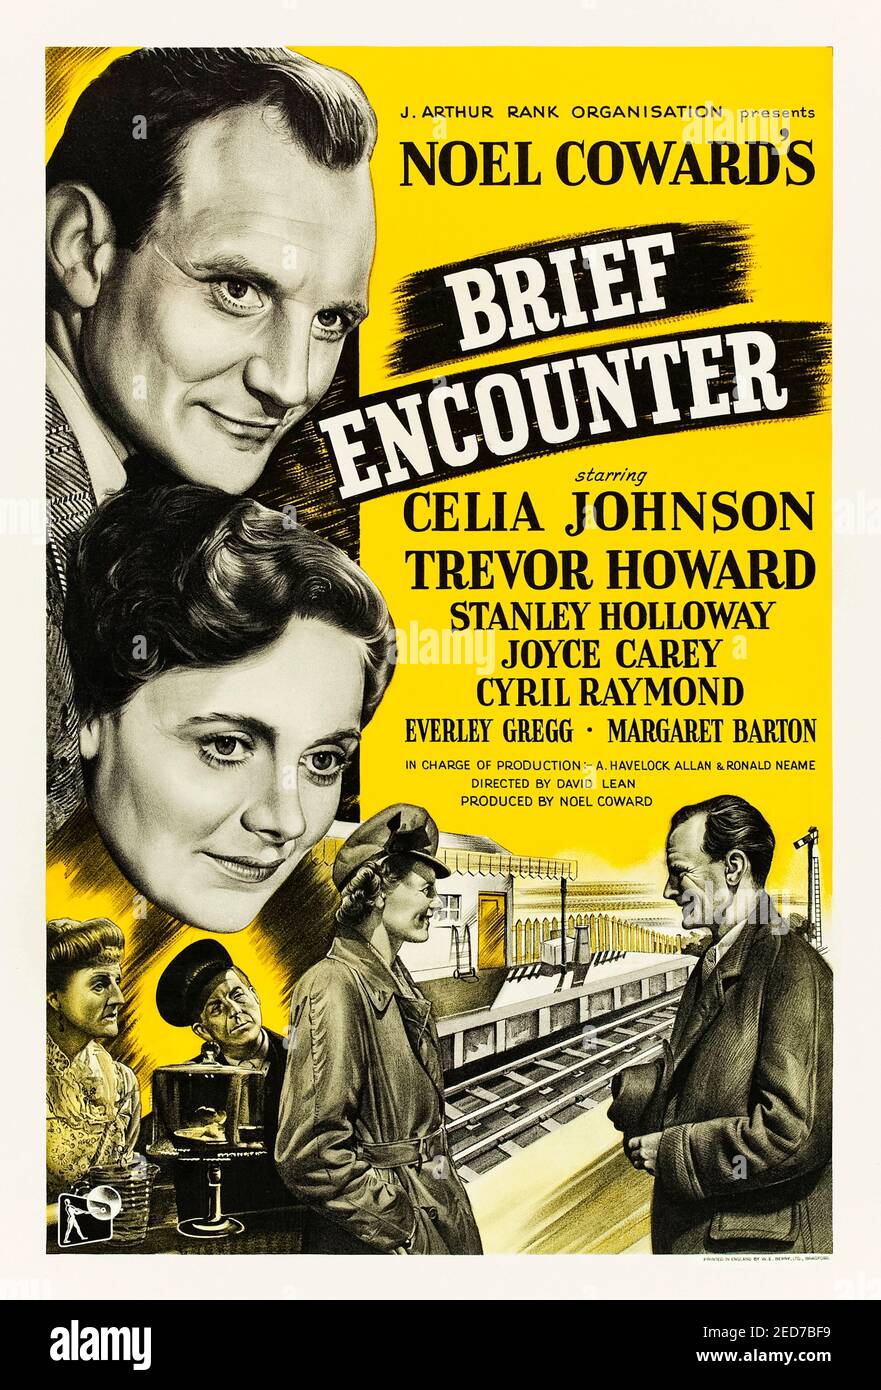 Brief Encounter (1945) directed by David Lean and starring Celia Johnson, Trevor Howard and Stanley Holloway. Adaptation of Noël Coward's play about a woman tempted to cheat on her husband after a chance encounter at a train station. Stock Photo